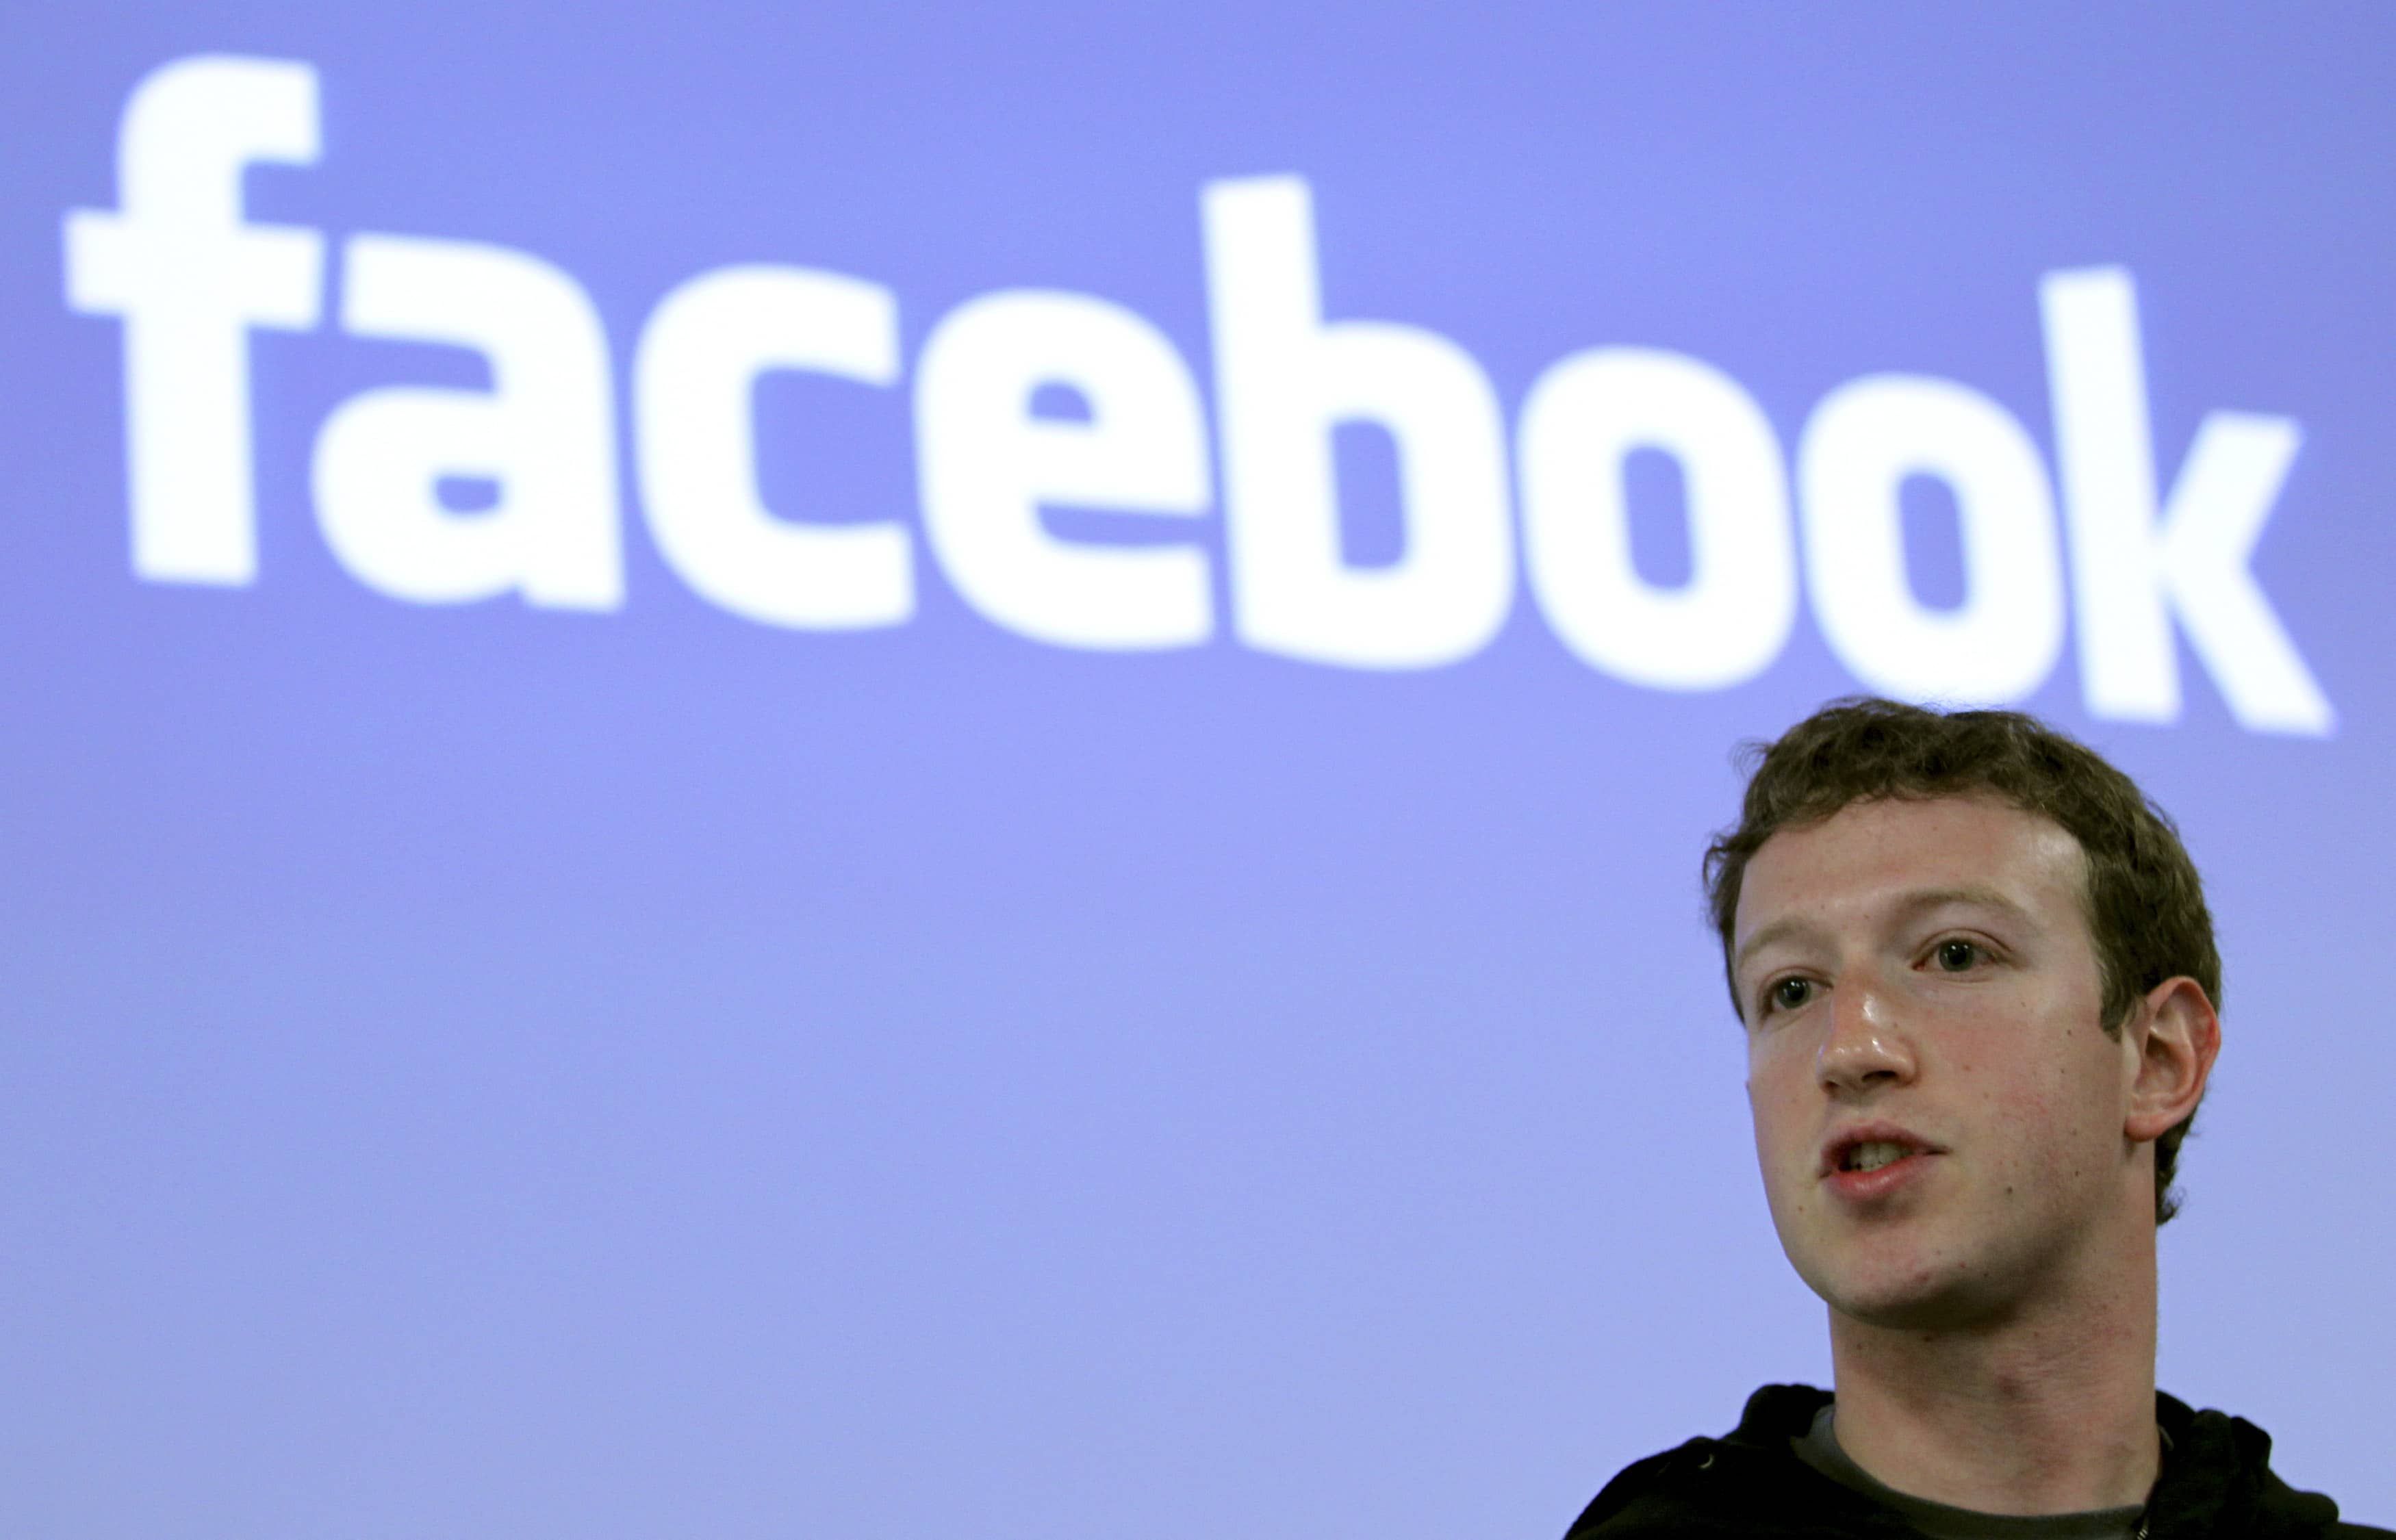 facebook-ceo-mark-zuckerberg-speaks-during-a-news-conference-at-facebook-headquarters-in-palo-alto